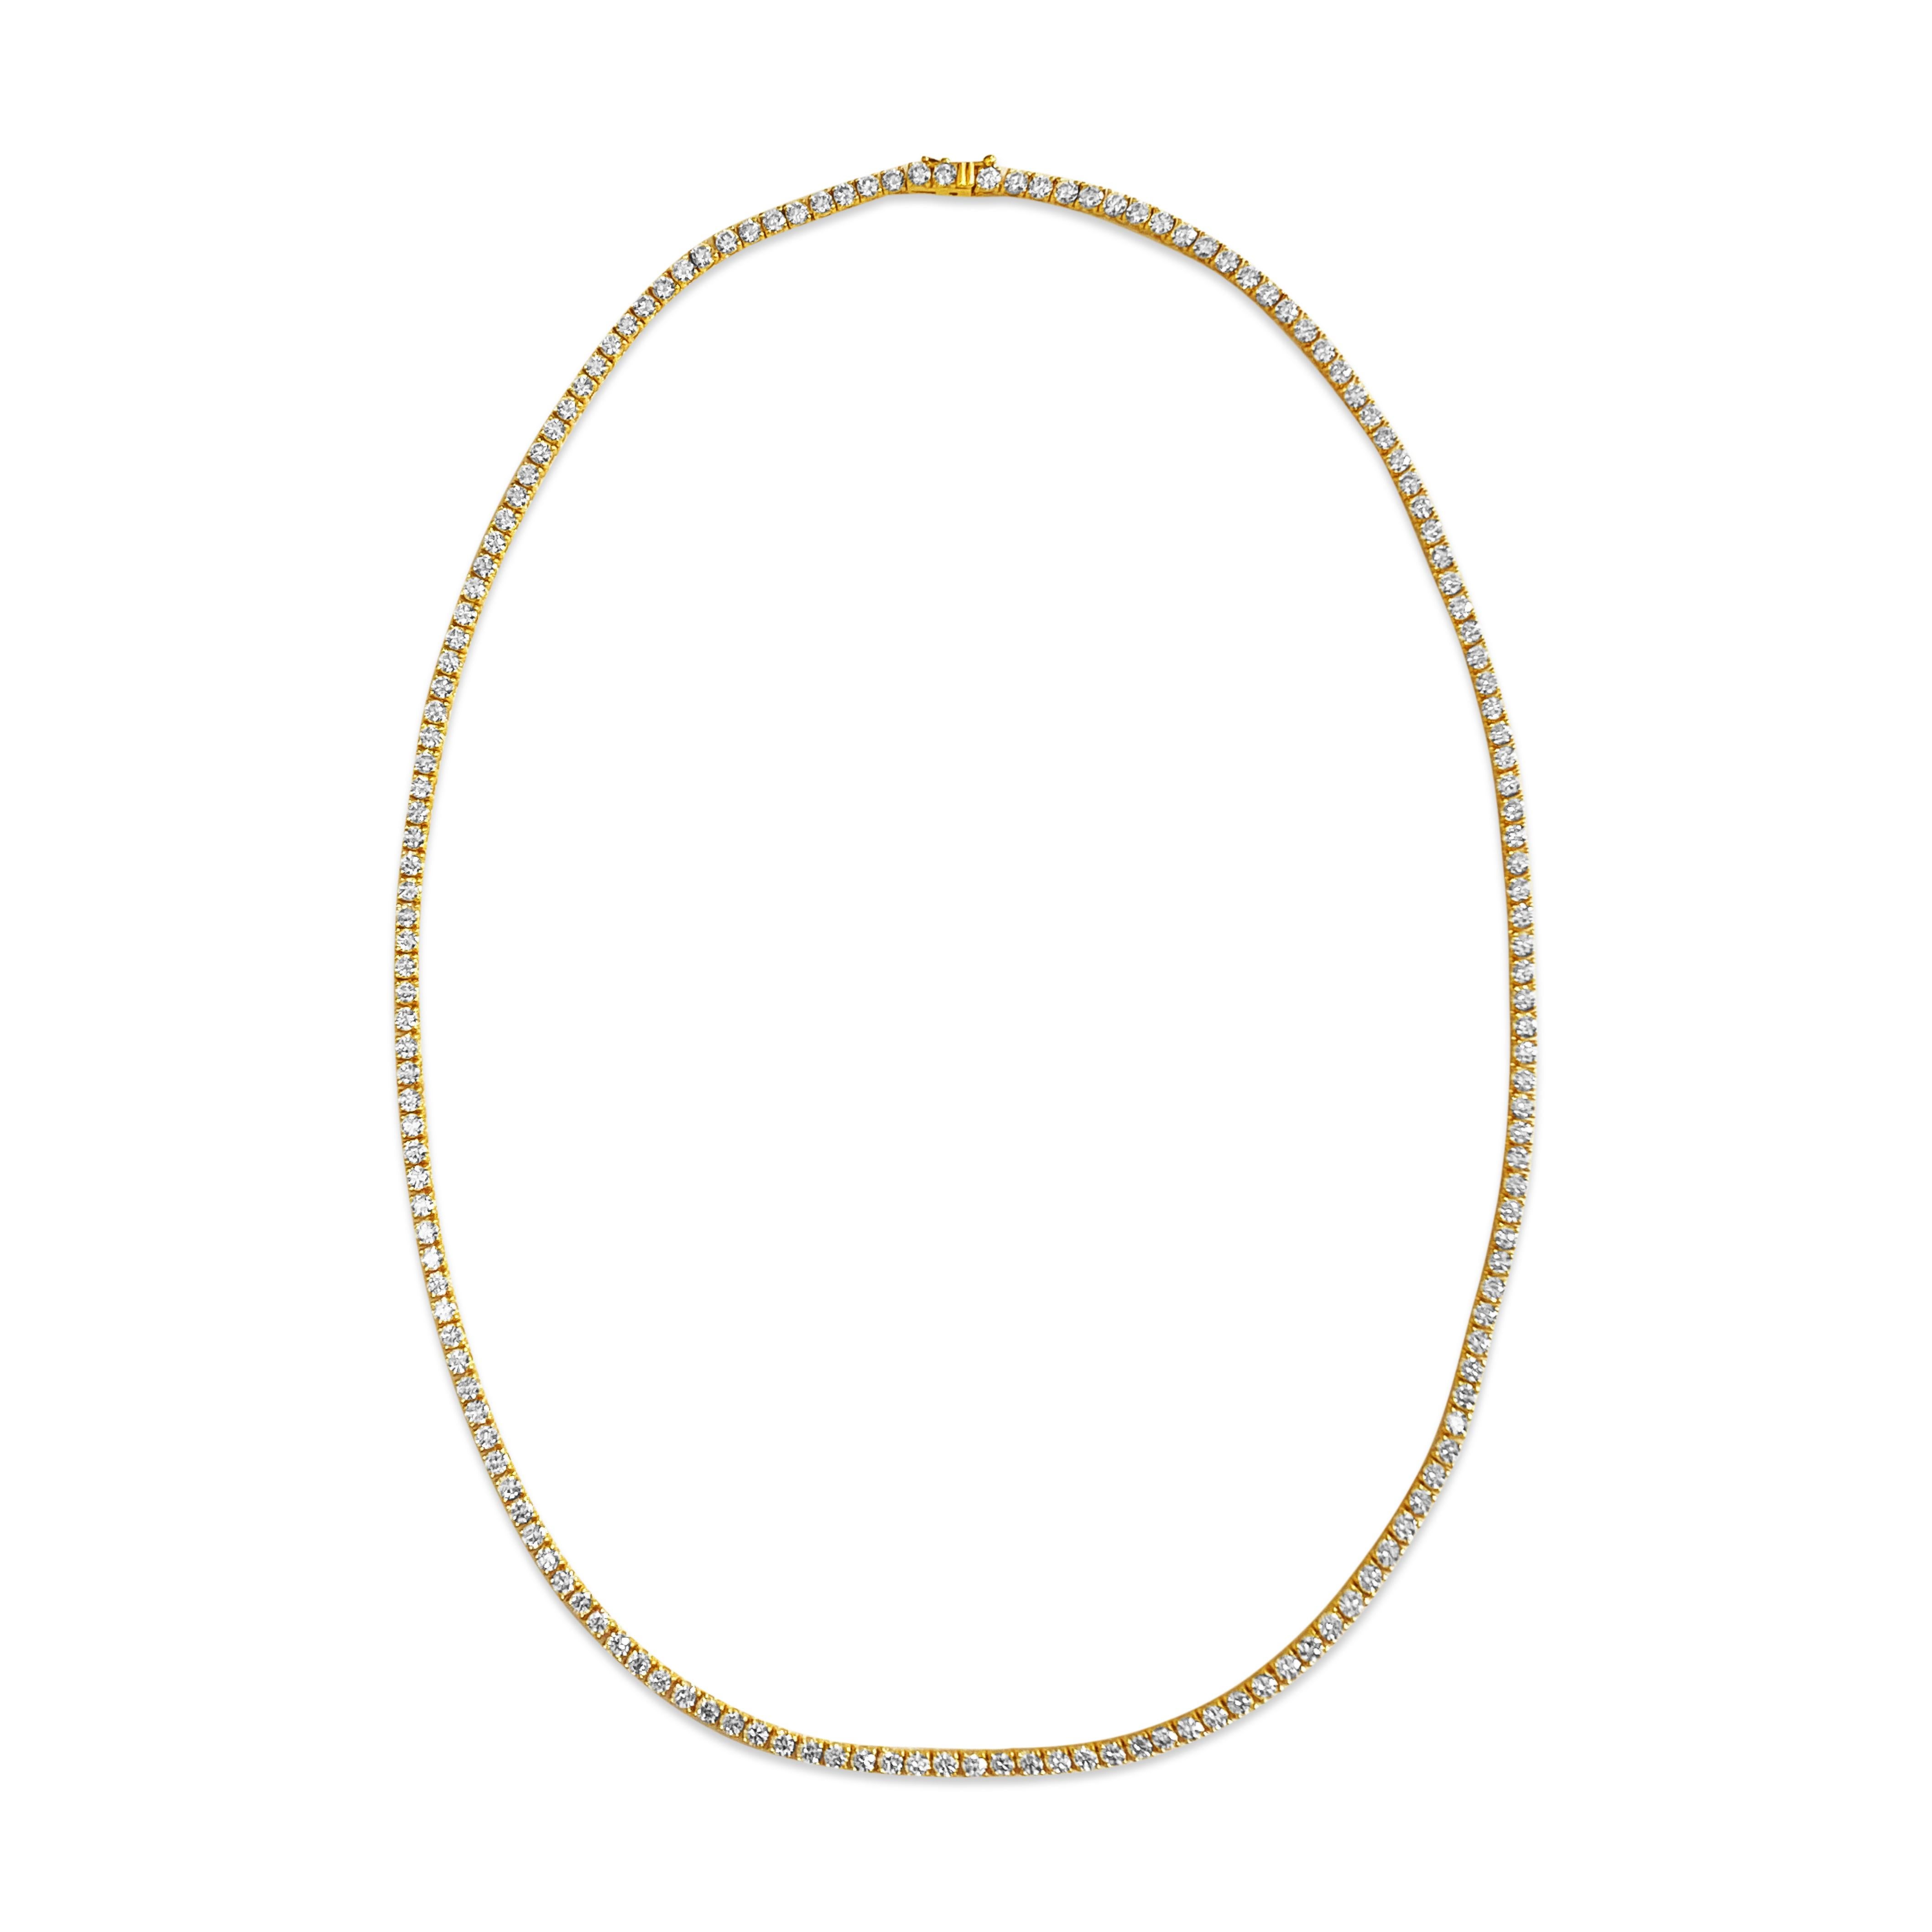 Crafted from luxurious 14k yellow gold, this exquisite diamond tennis necklace boasts a dazzling array of round brilliant cut diamonds totaling 14.50 carats. Each diamond showcases impeccable clarity, rated VVS, and a subtle H color, radiating